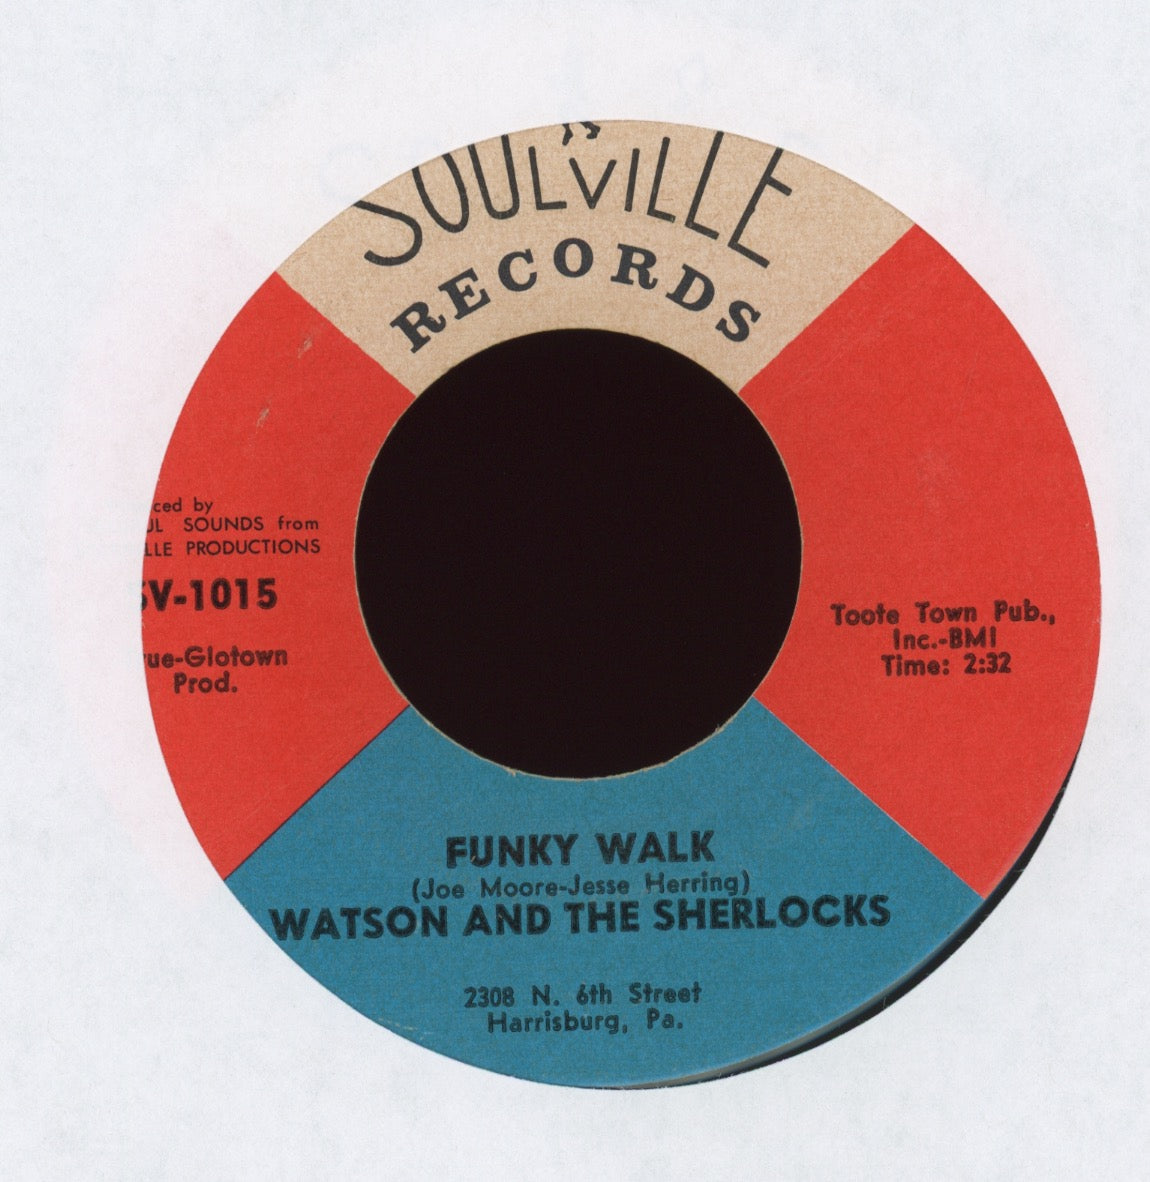 Watson And The Sherlocks - Standing On The Corner on Soulville Northern Soul Funk 45